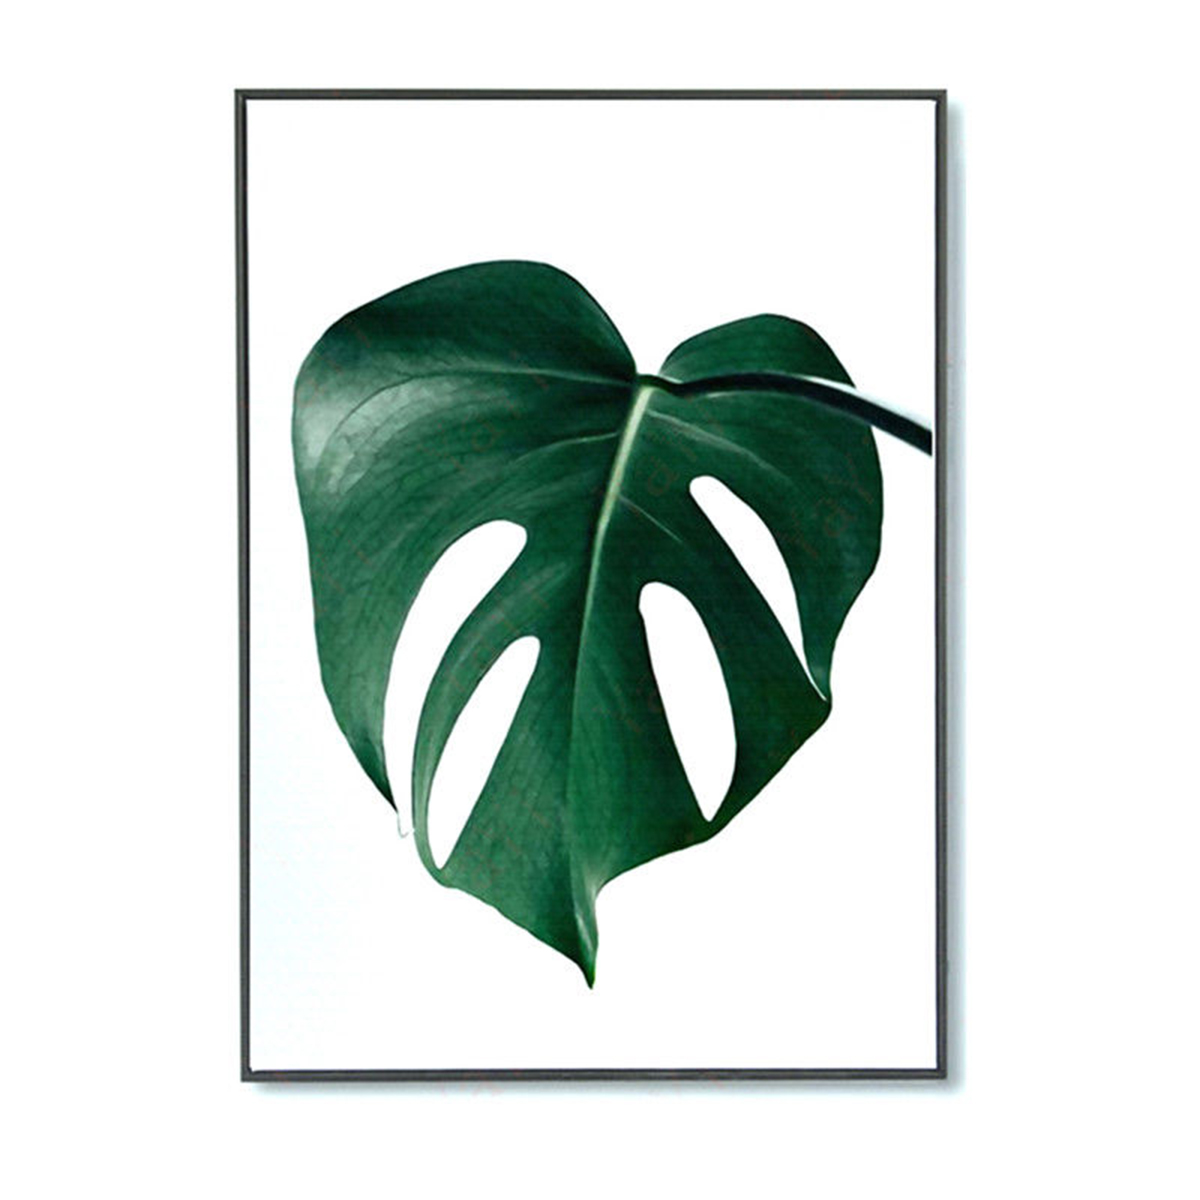 1-Piece-Canvas-Print-Painting-Nordic-Green-Plant-Leaf-Canvas-Art-Poster-Print-Wall-Picture-Home-Deco-1743641-11